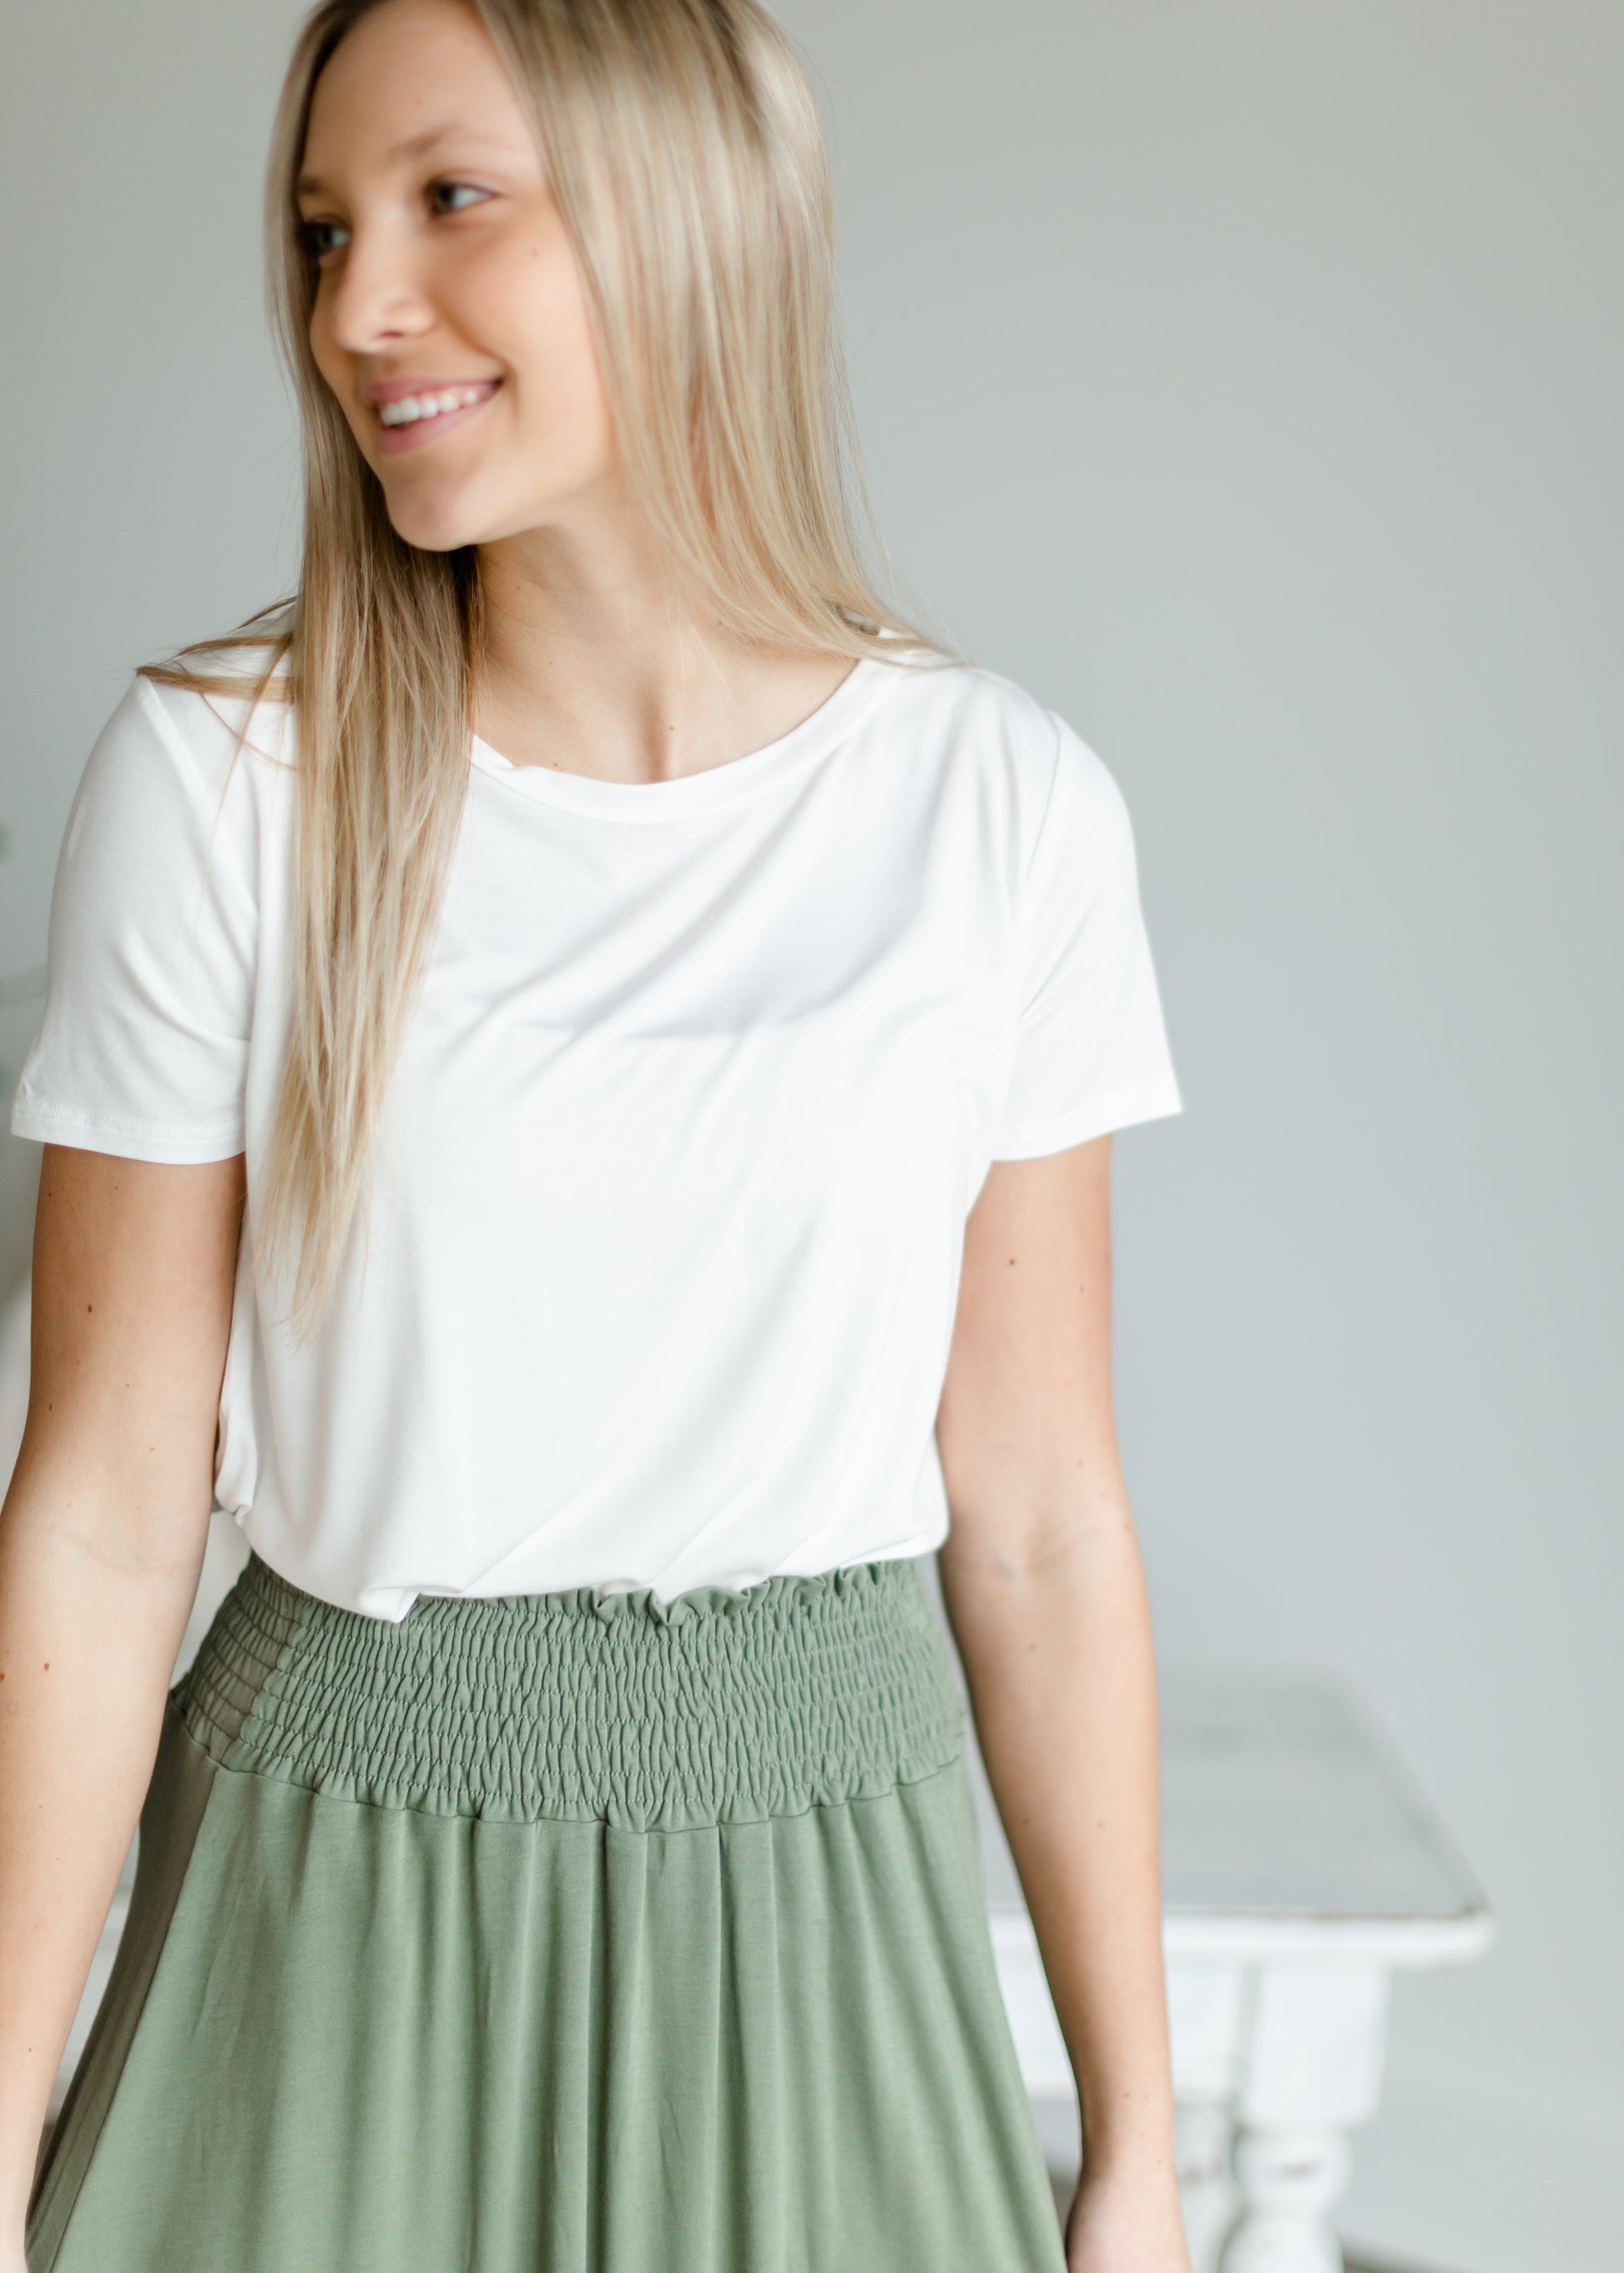 Relaxed Fit Scoop Neck Top- FINAL SALE Tops S / Ivory